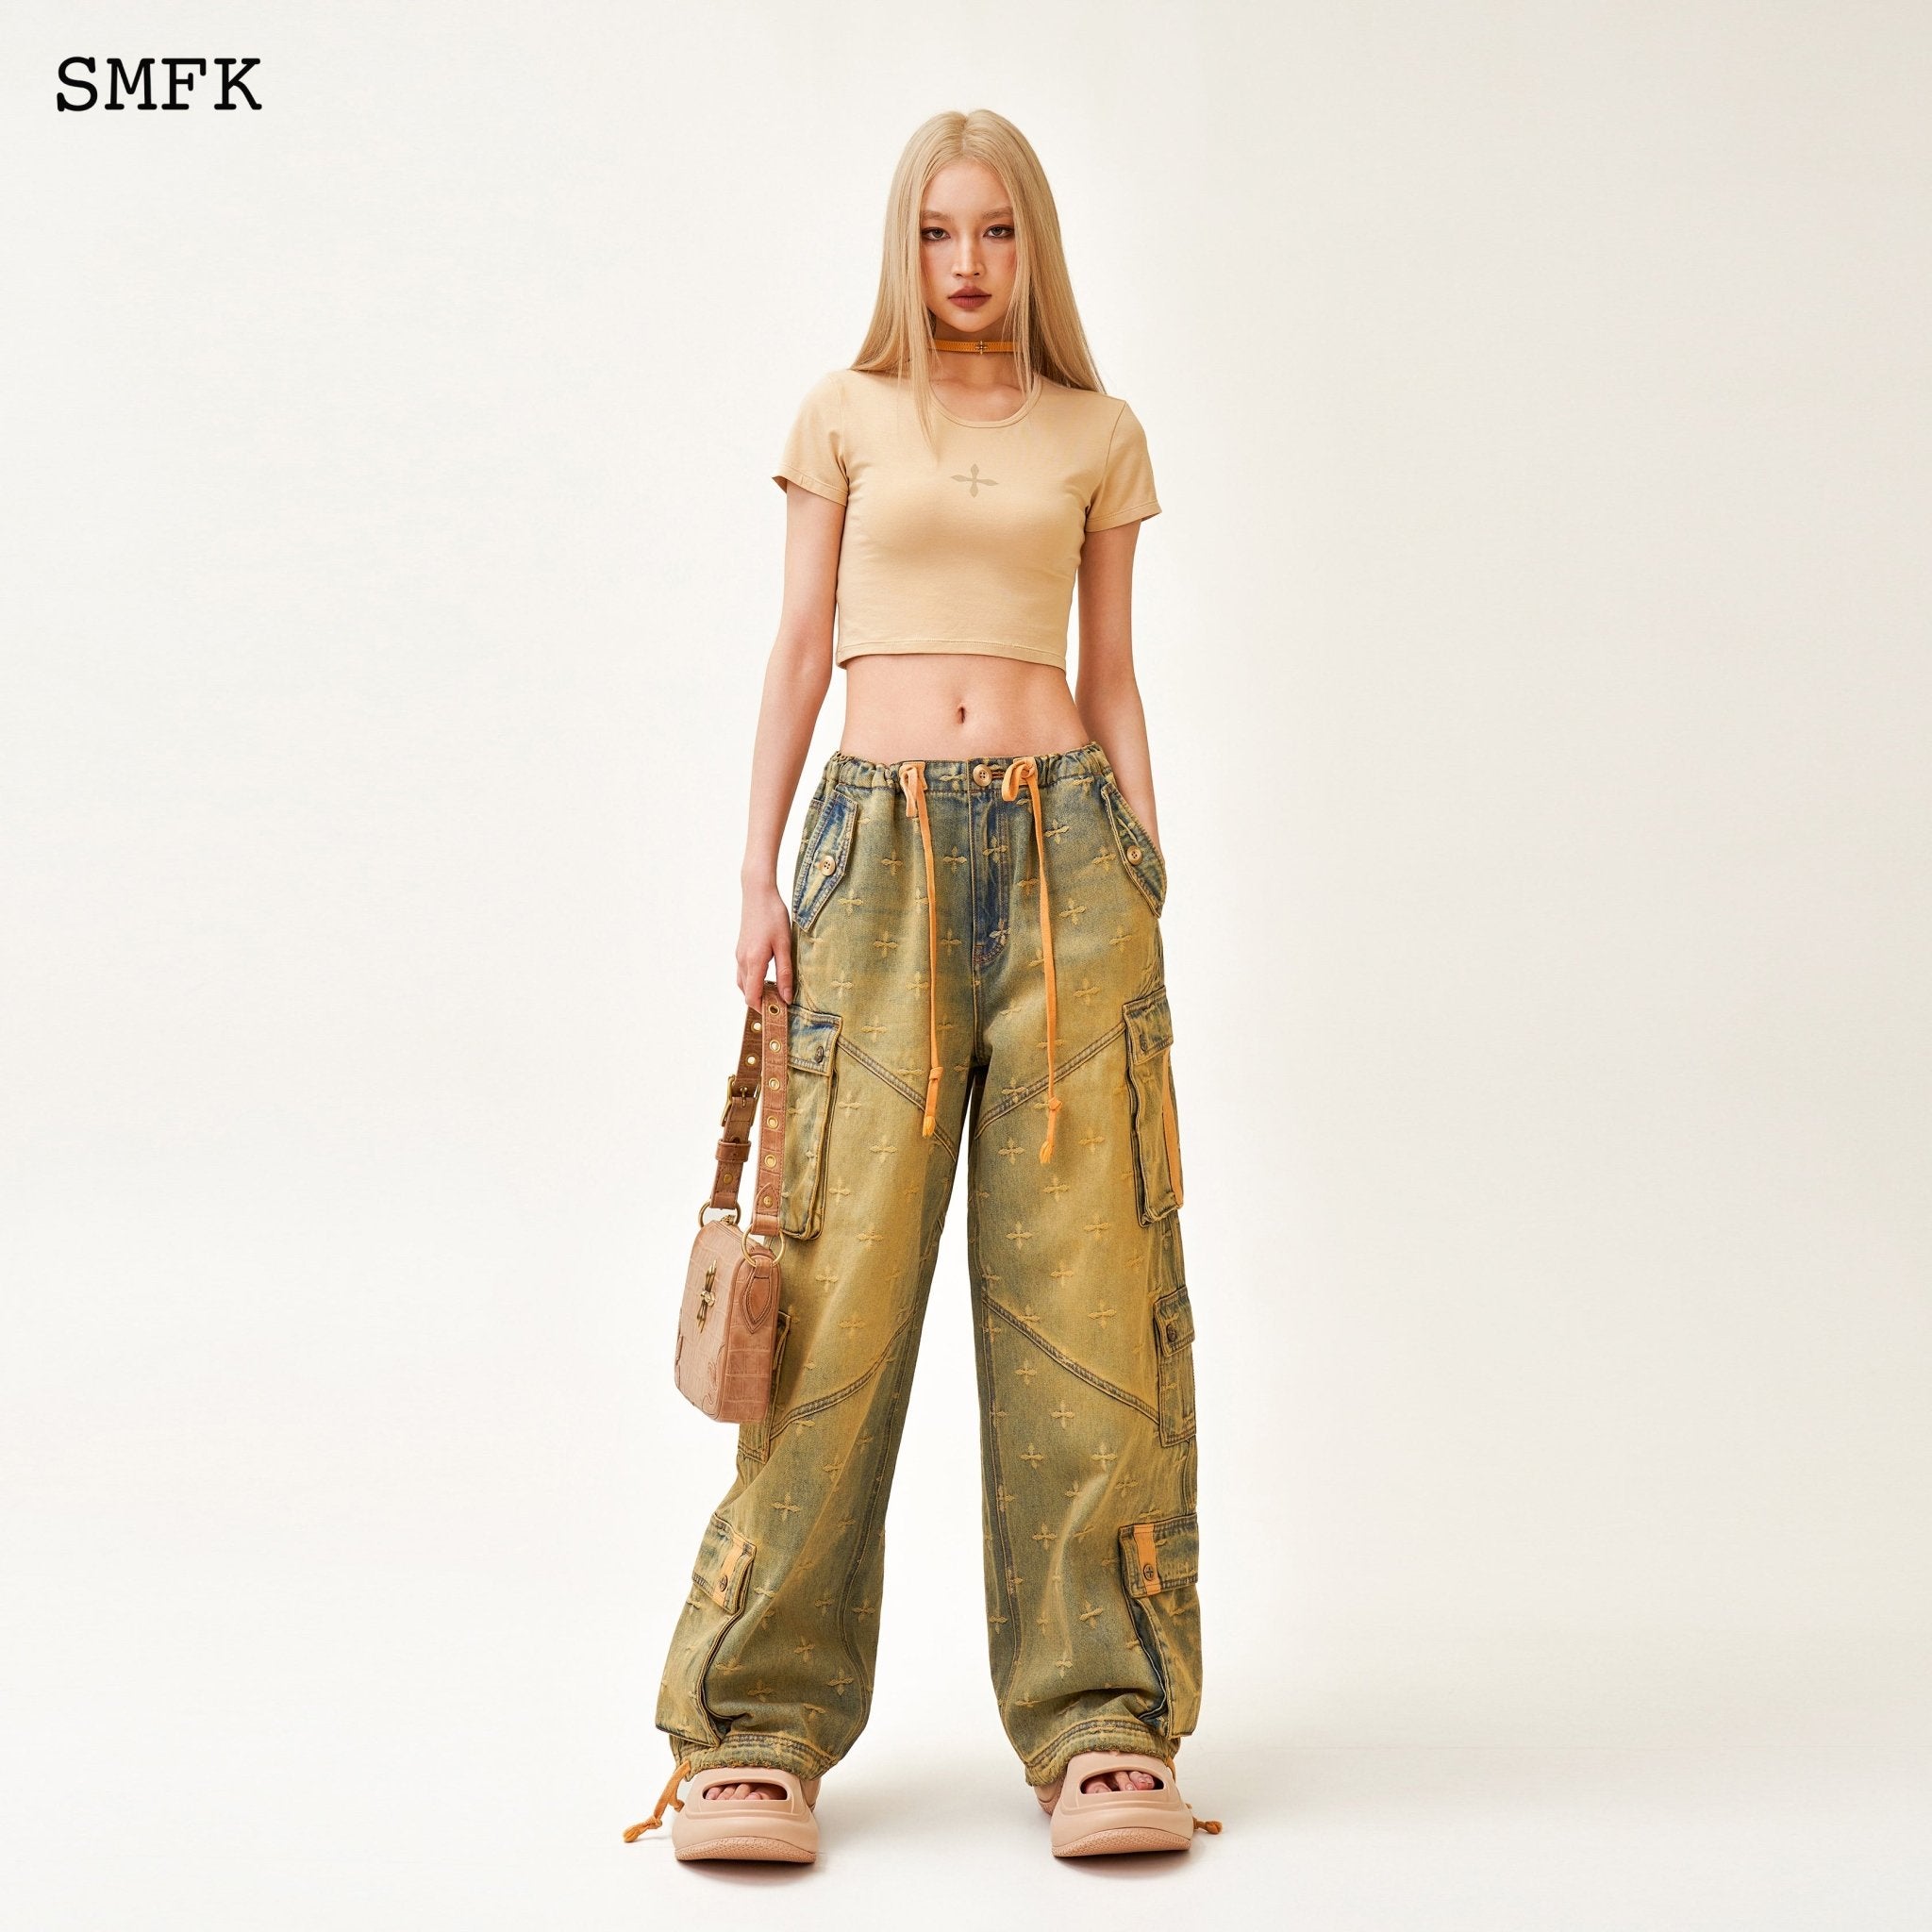 SMFK Compass Cross Classic Sporty Tights Tee In Sand | MADA IN CHINA